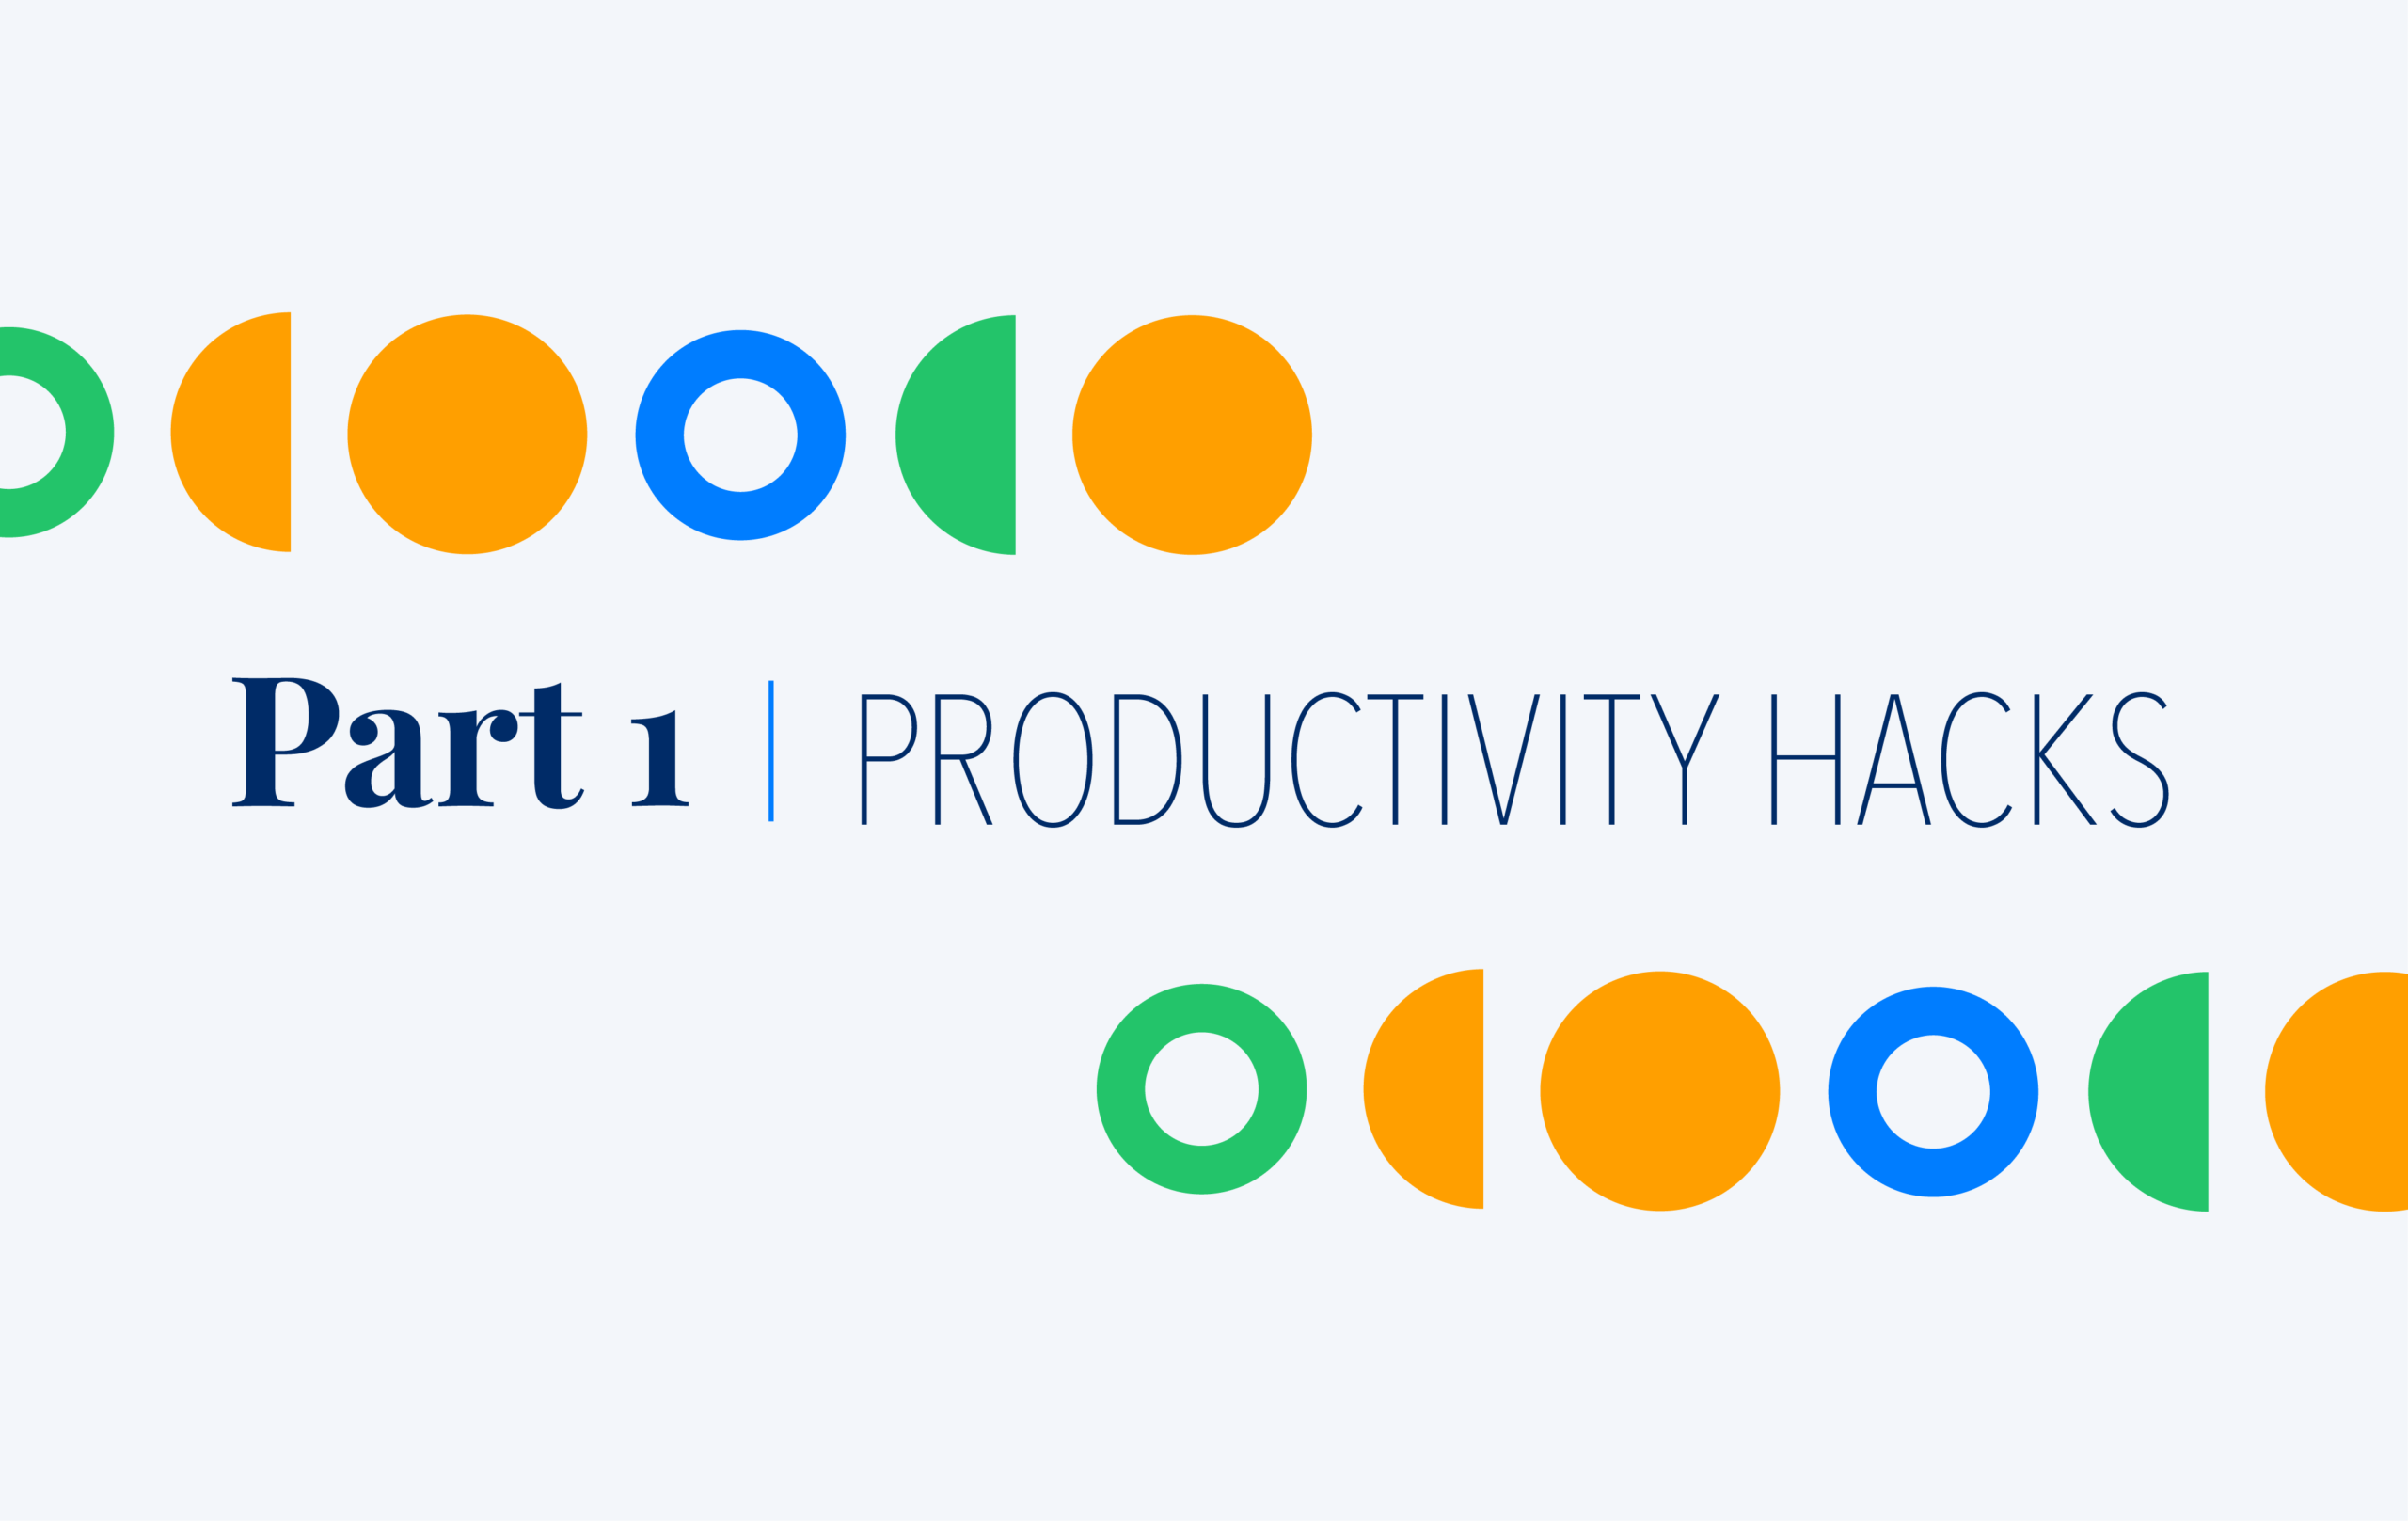 Part 1 of Productivity Hacks: 8 Ways to Improve Your Time Management and Meetings